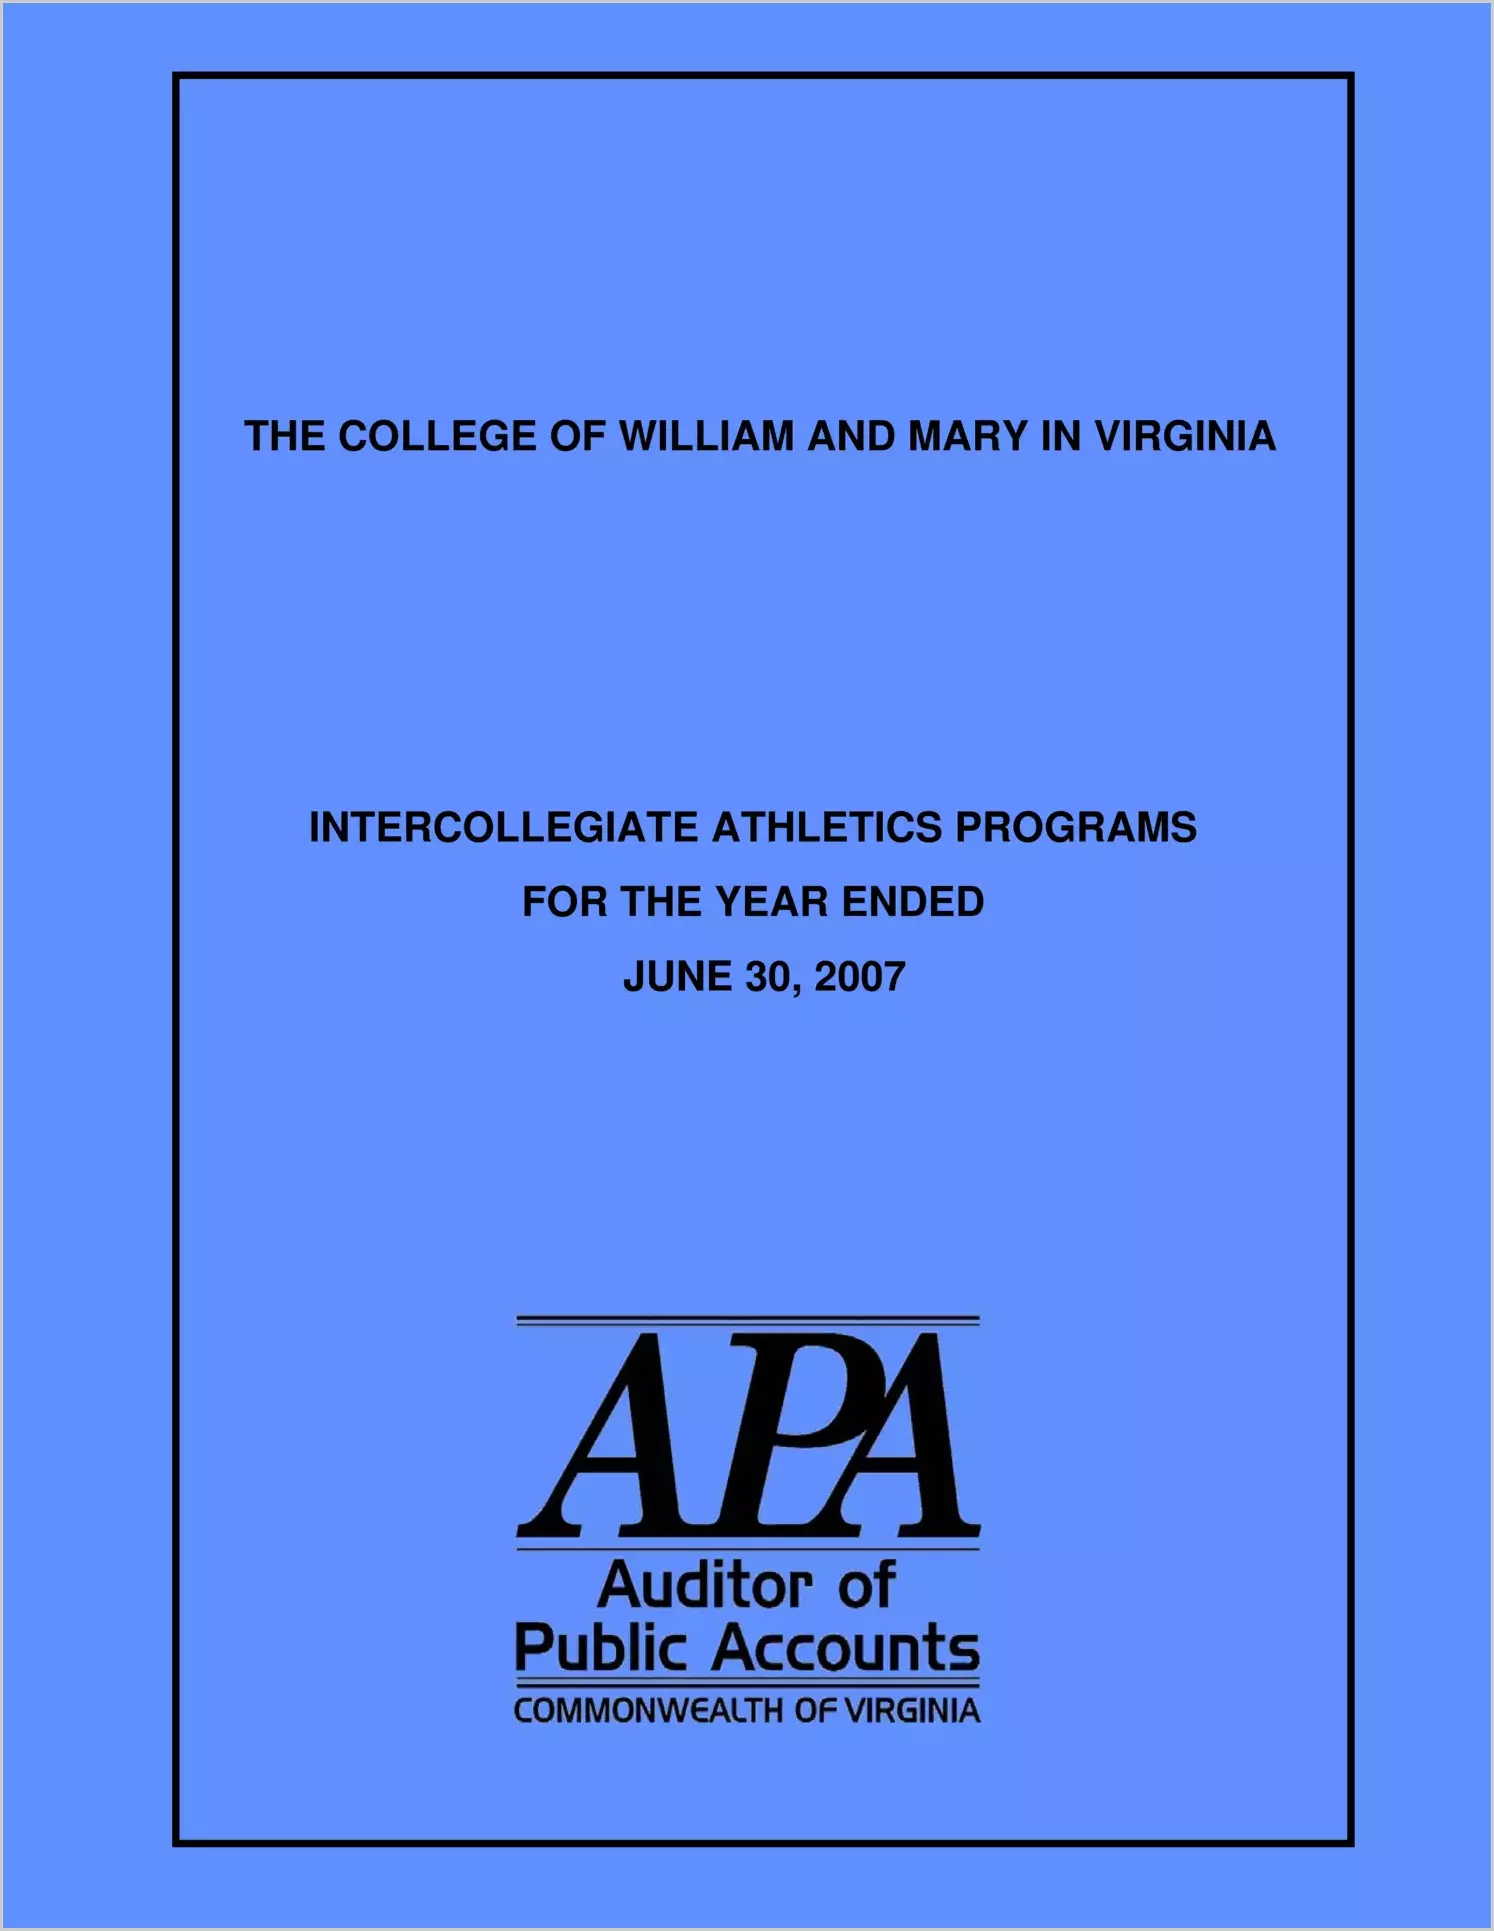 The College of William and Mary in Virginia Intercollegiate Athletics Programs for the year ended June 30, 2007